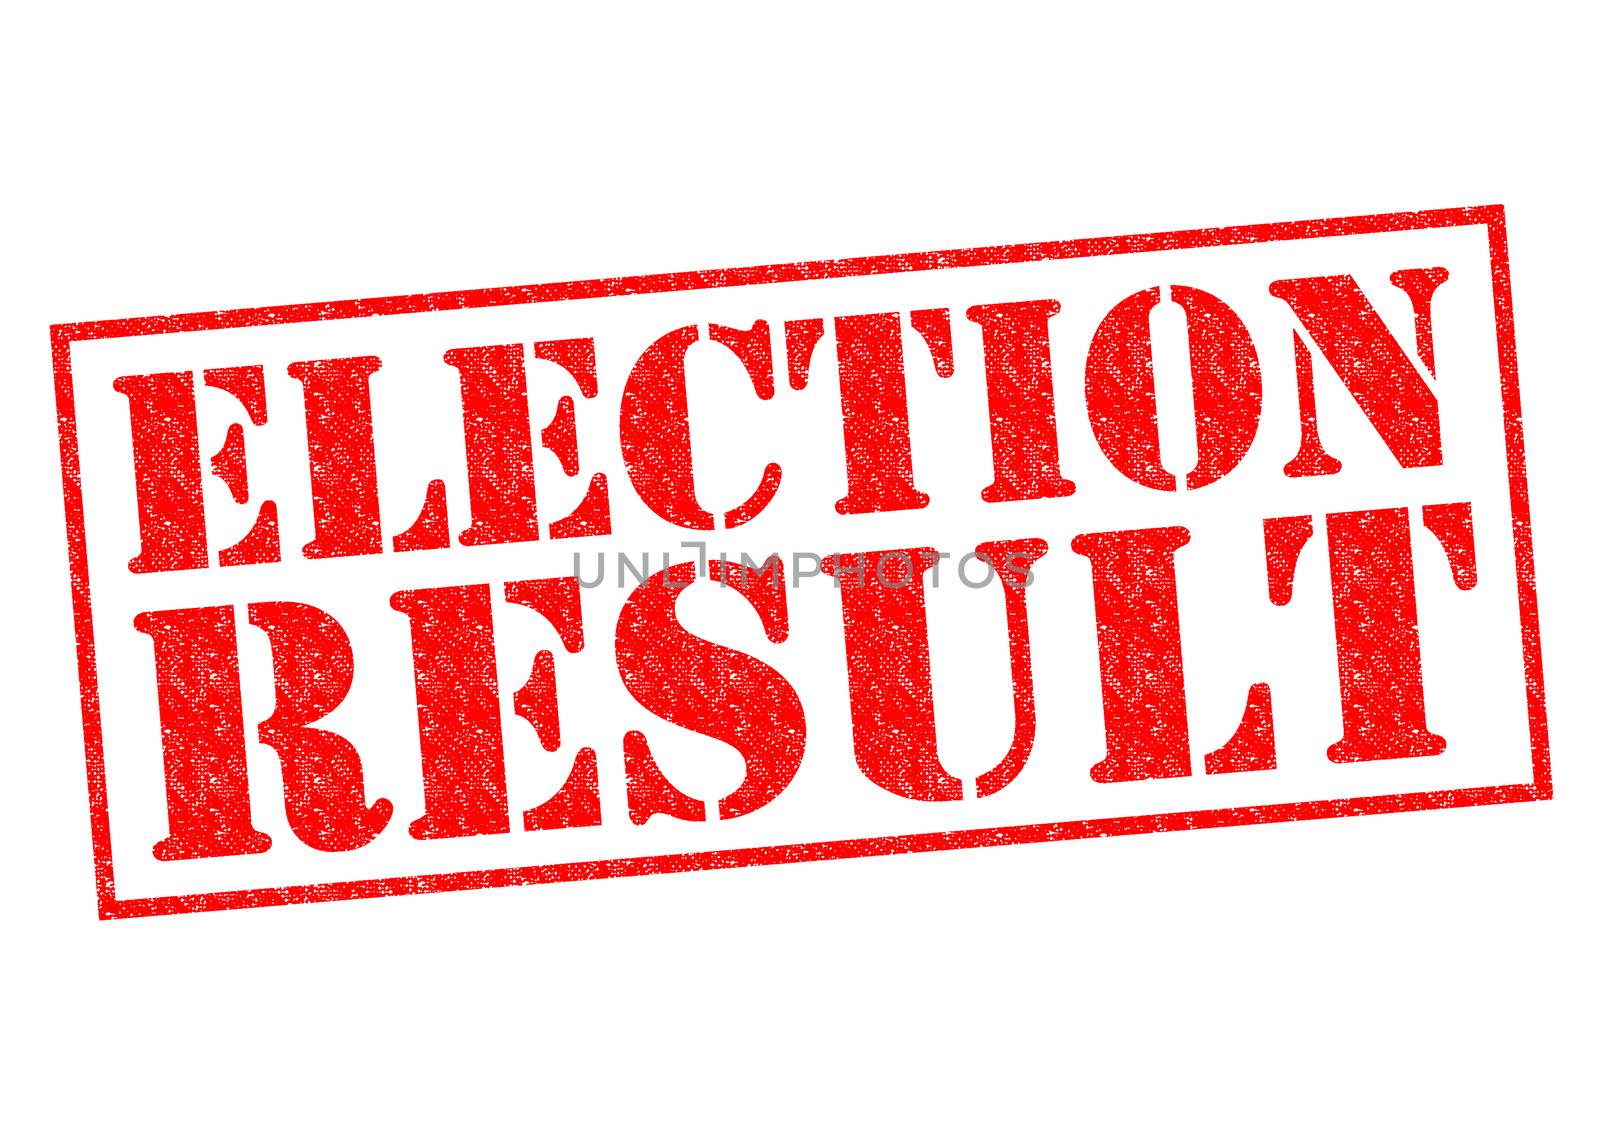 ELECTION RESULT red Rubber Stamp over a white background.